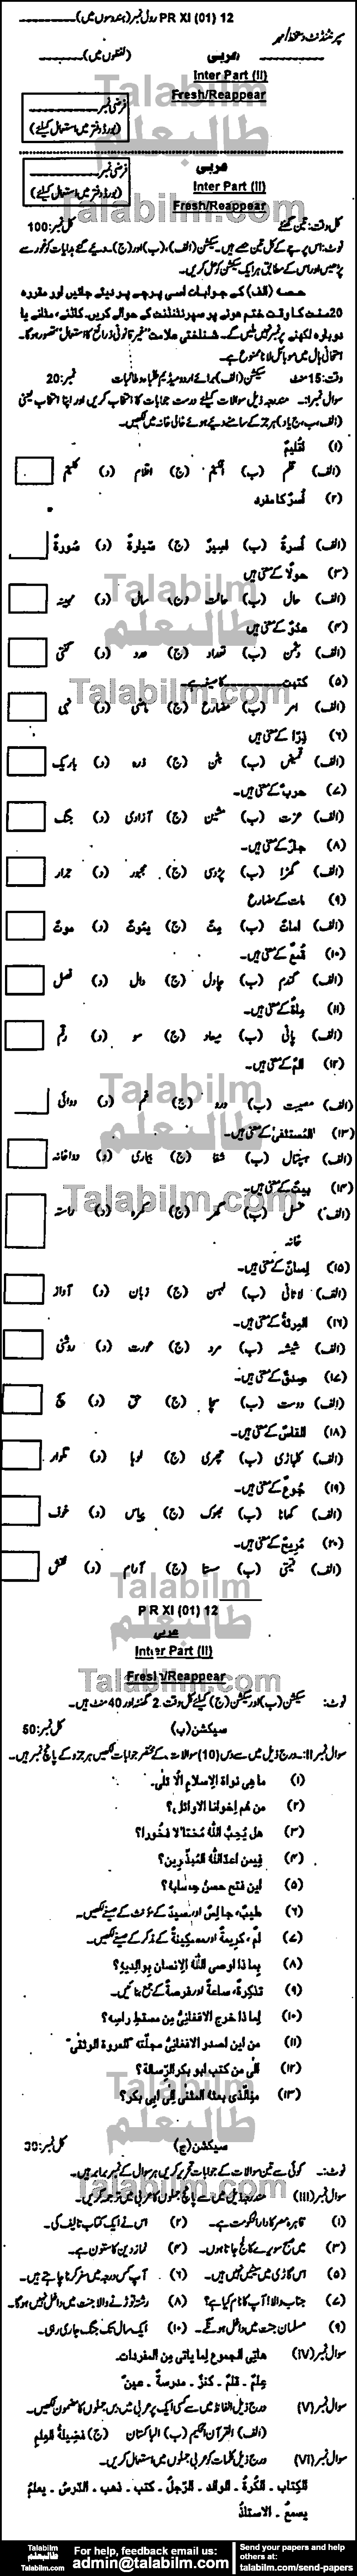 Arabic 0 past paper for Group-I 2012